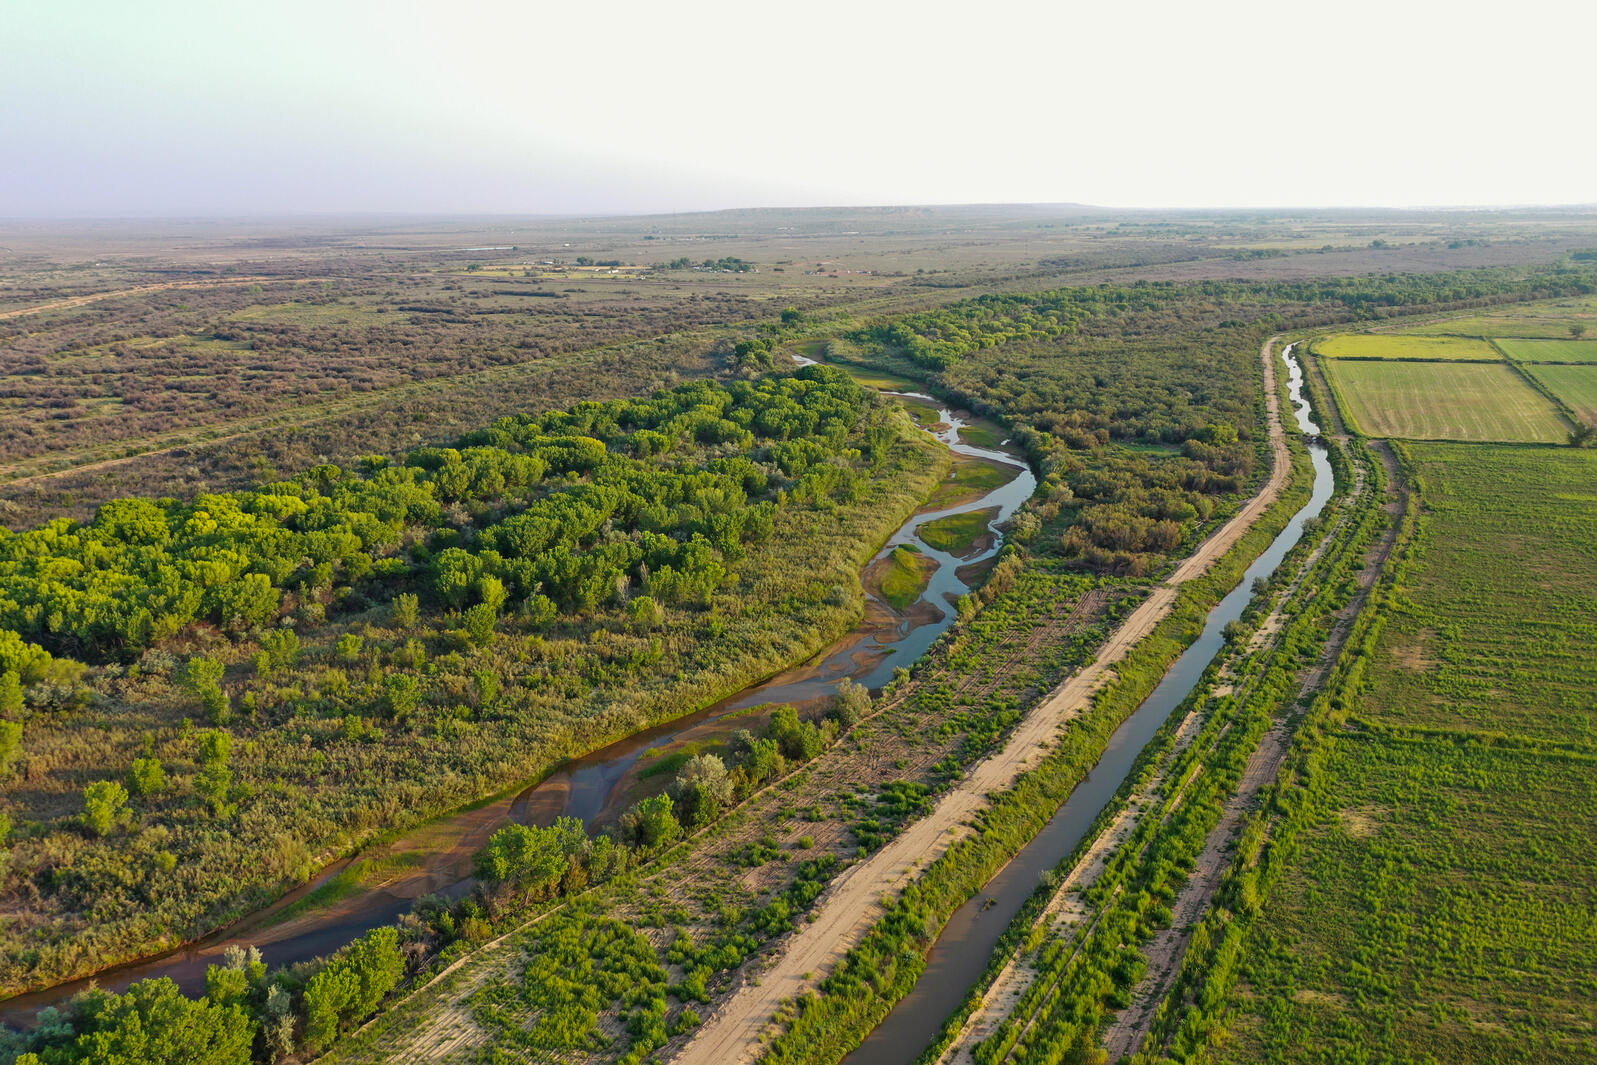 Drone imagery of the Rio Grande and adjacent irrigated farmland